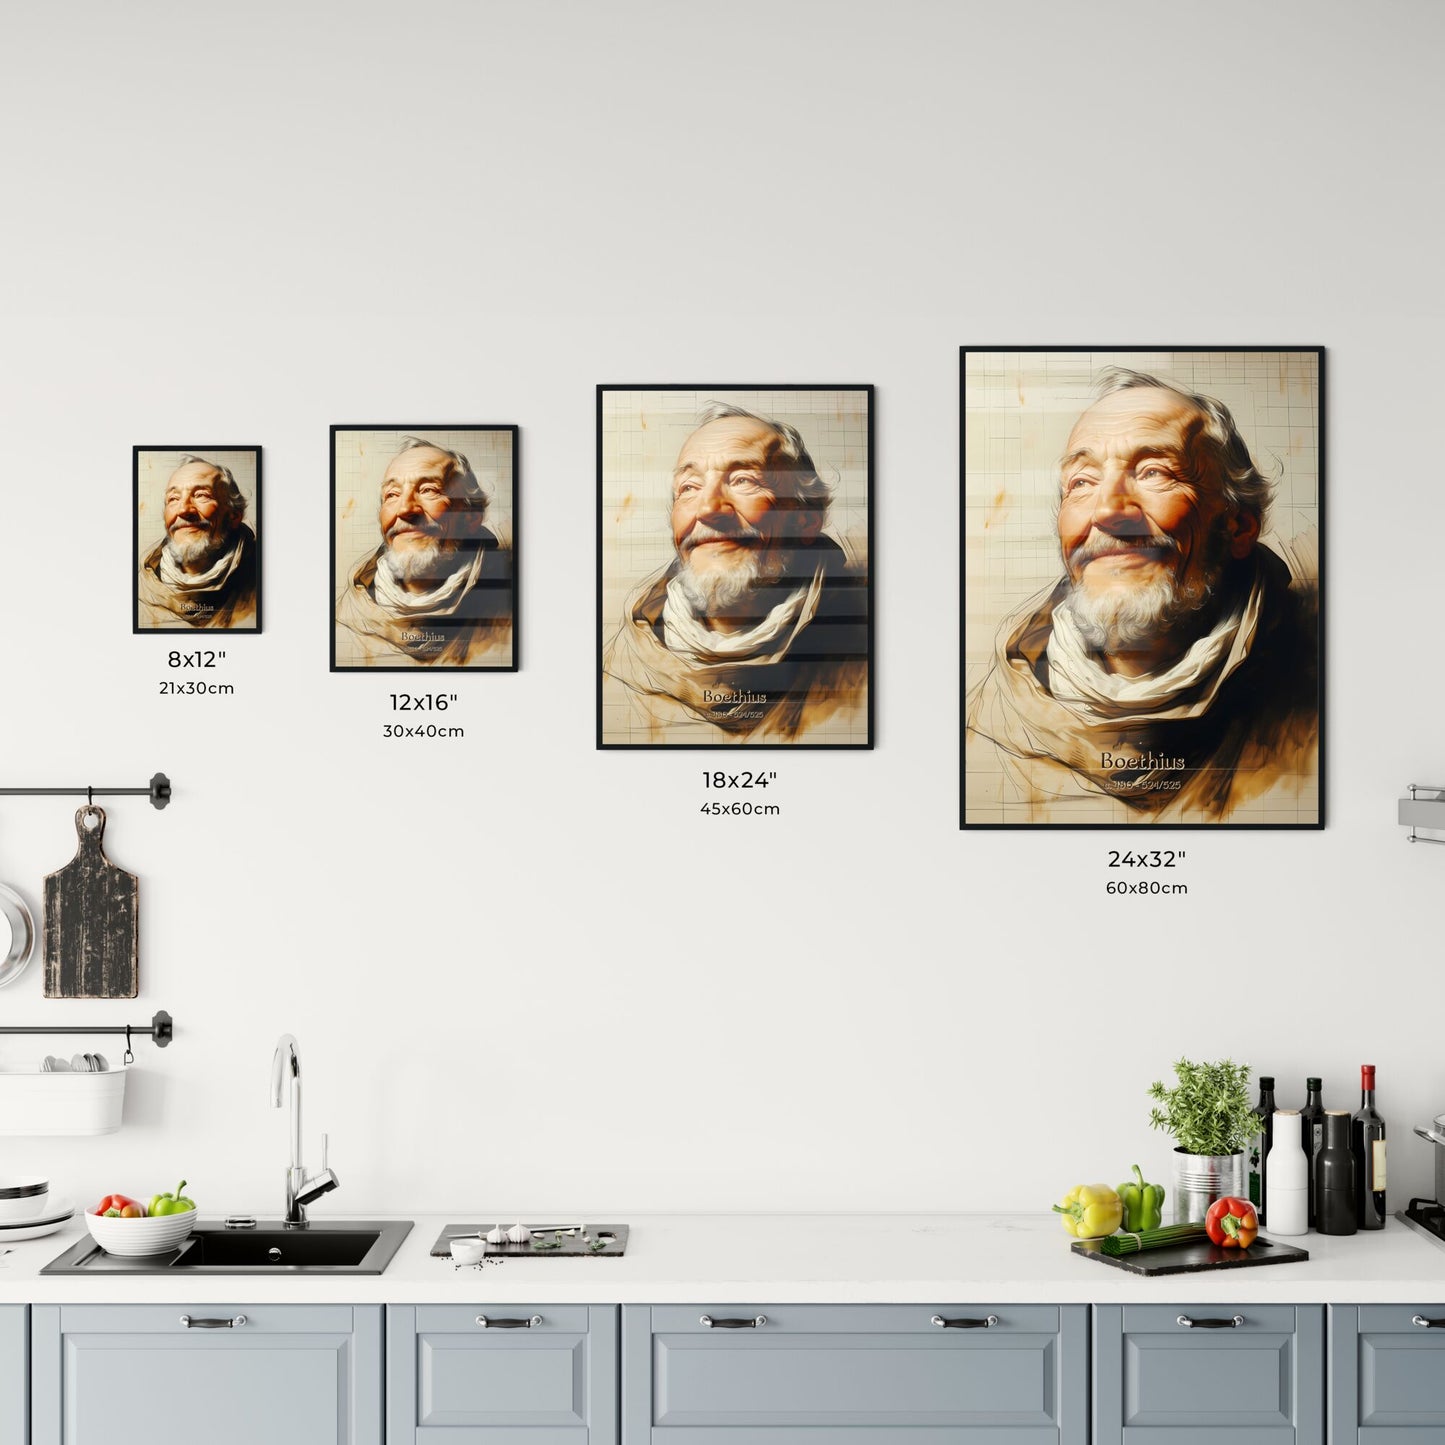 Boethius, c. 480 - 524/525, A Poster of a painting of a man with a beard Default Title